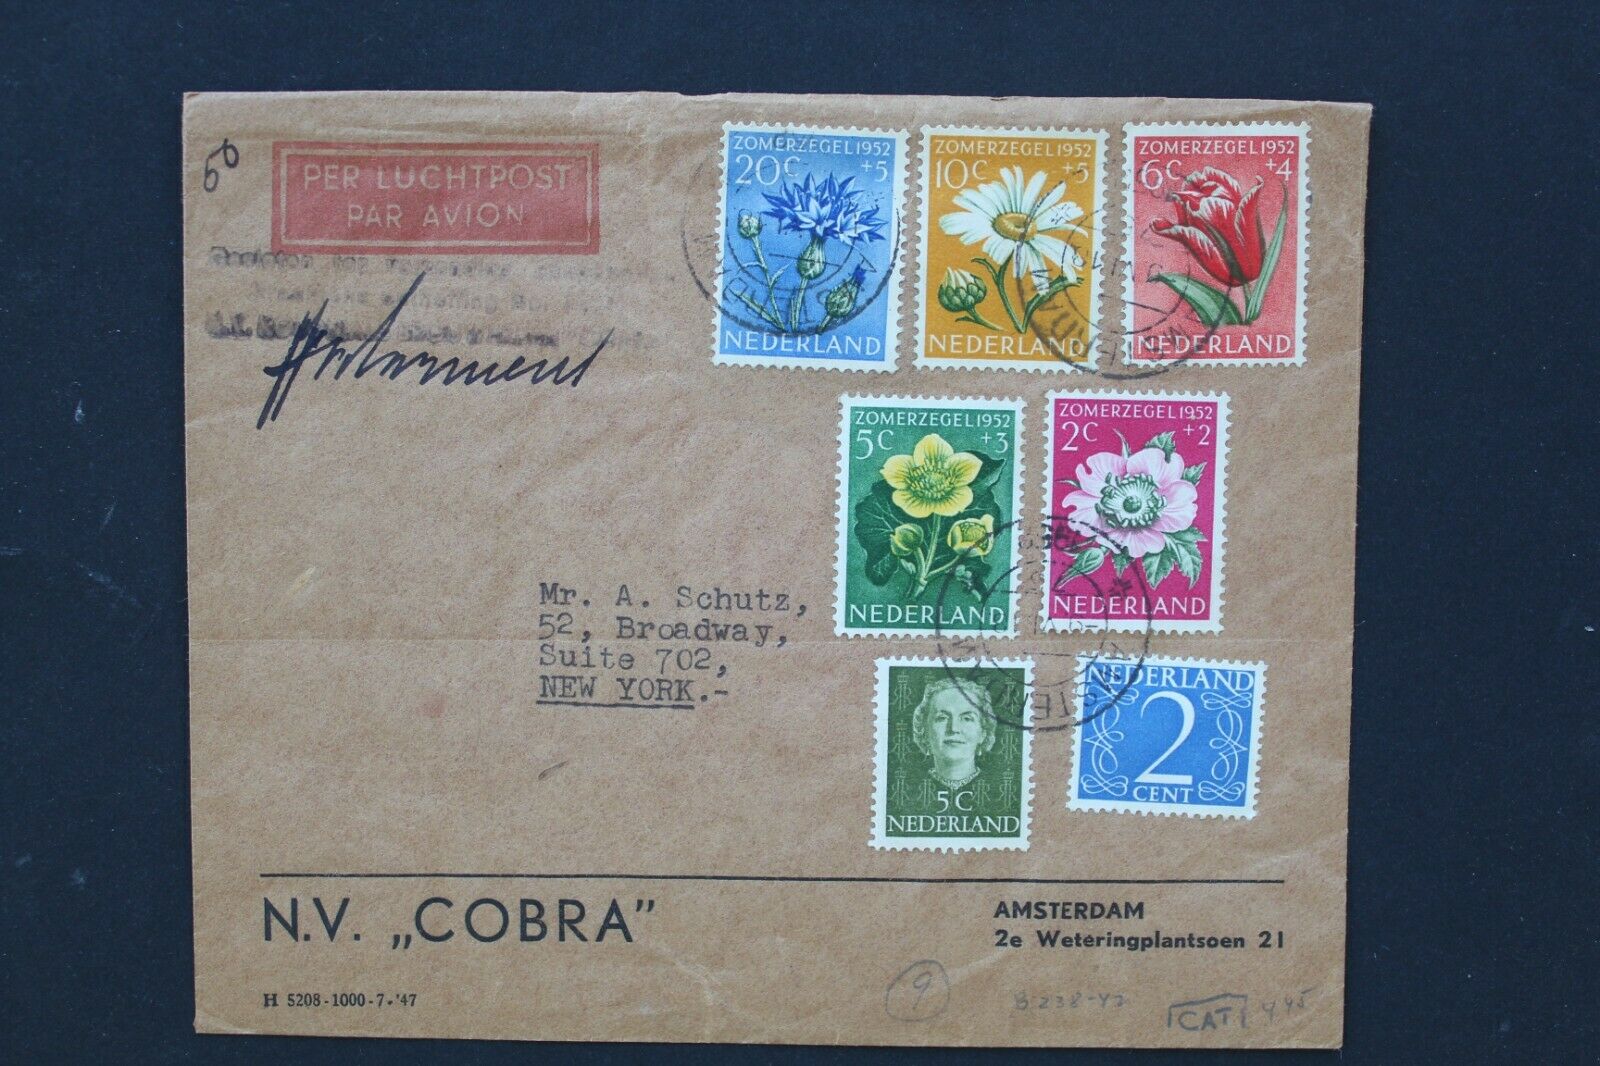 Sc5 Netherlands 1952 Charity Stamps (flowers) On Air Mail Cover 50c Postage Paid